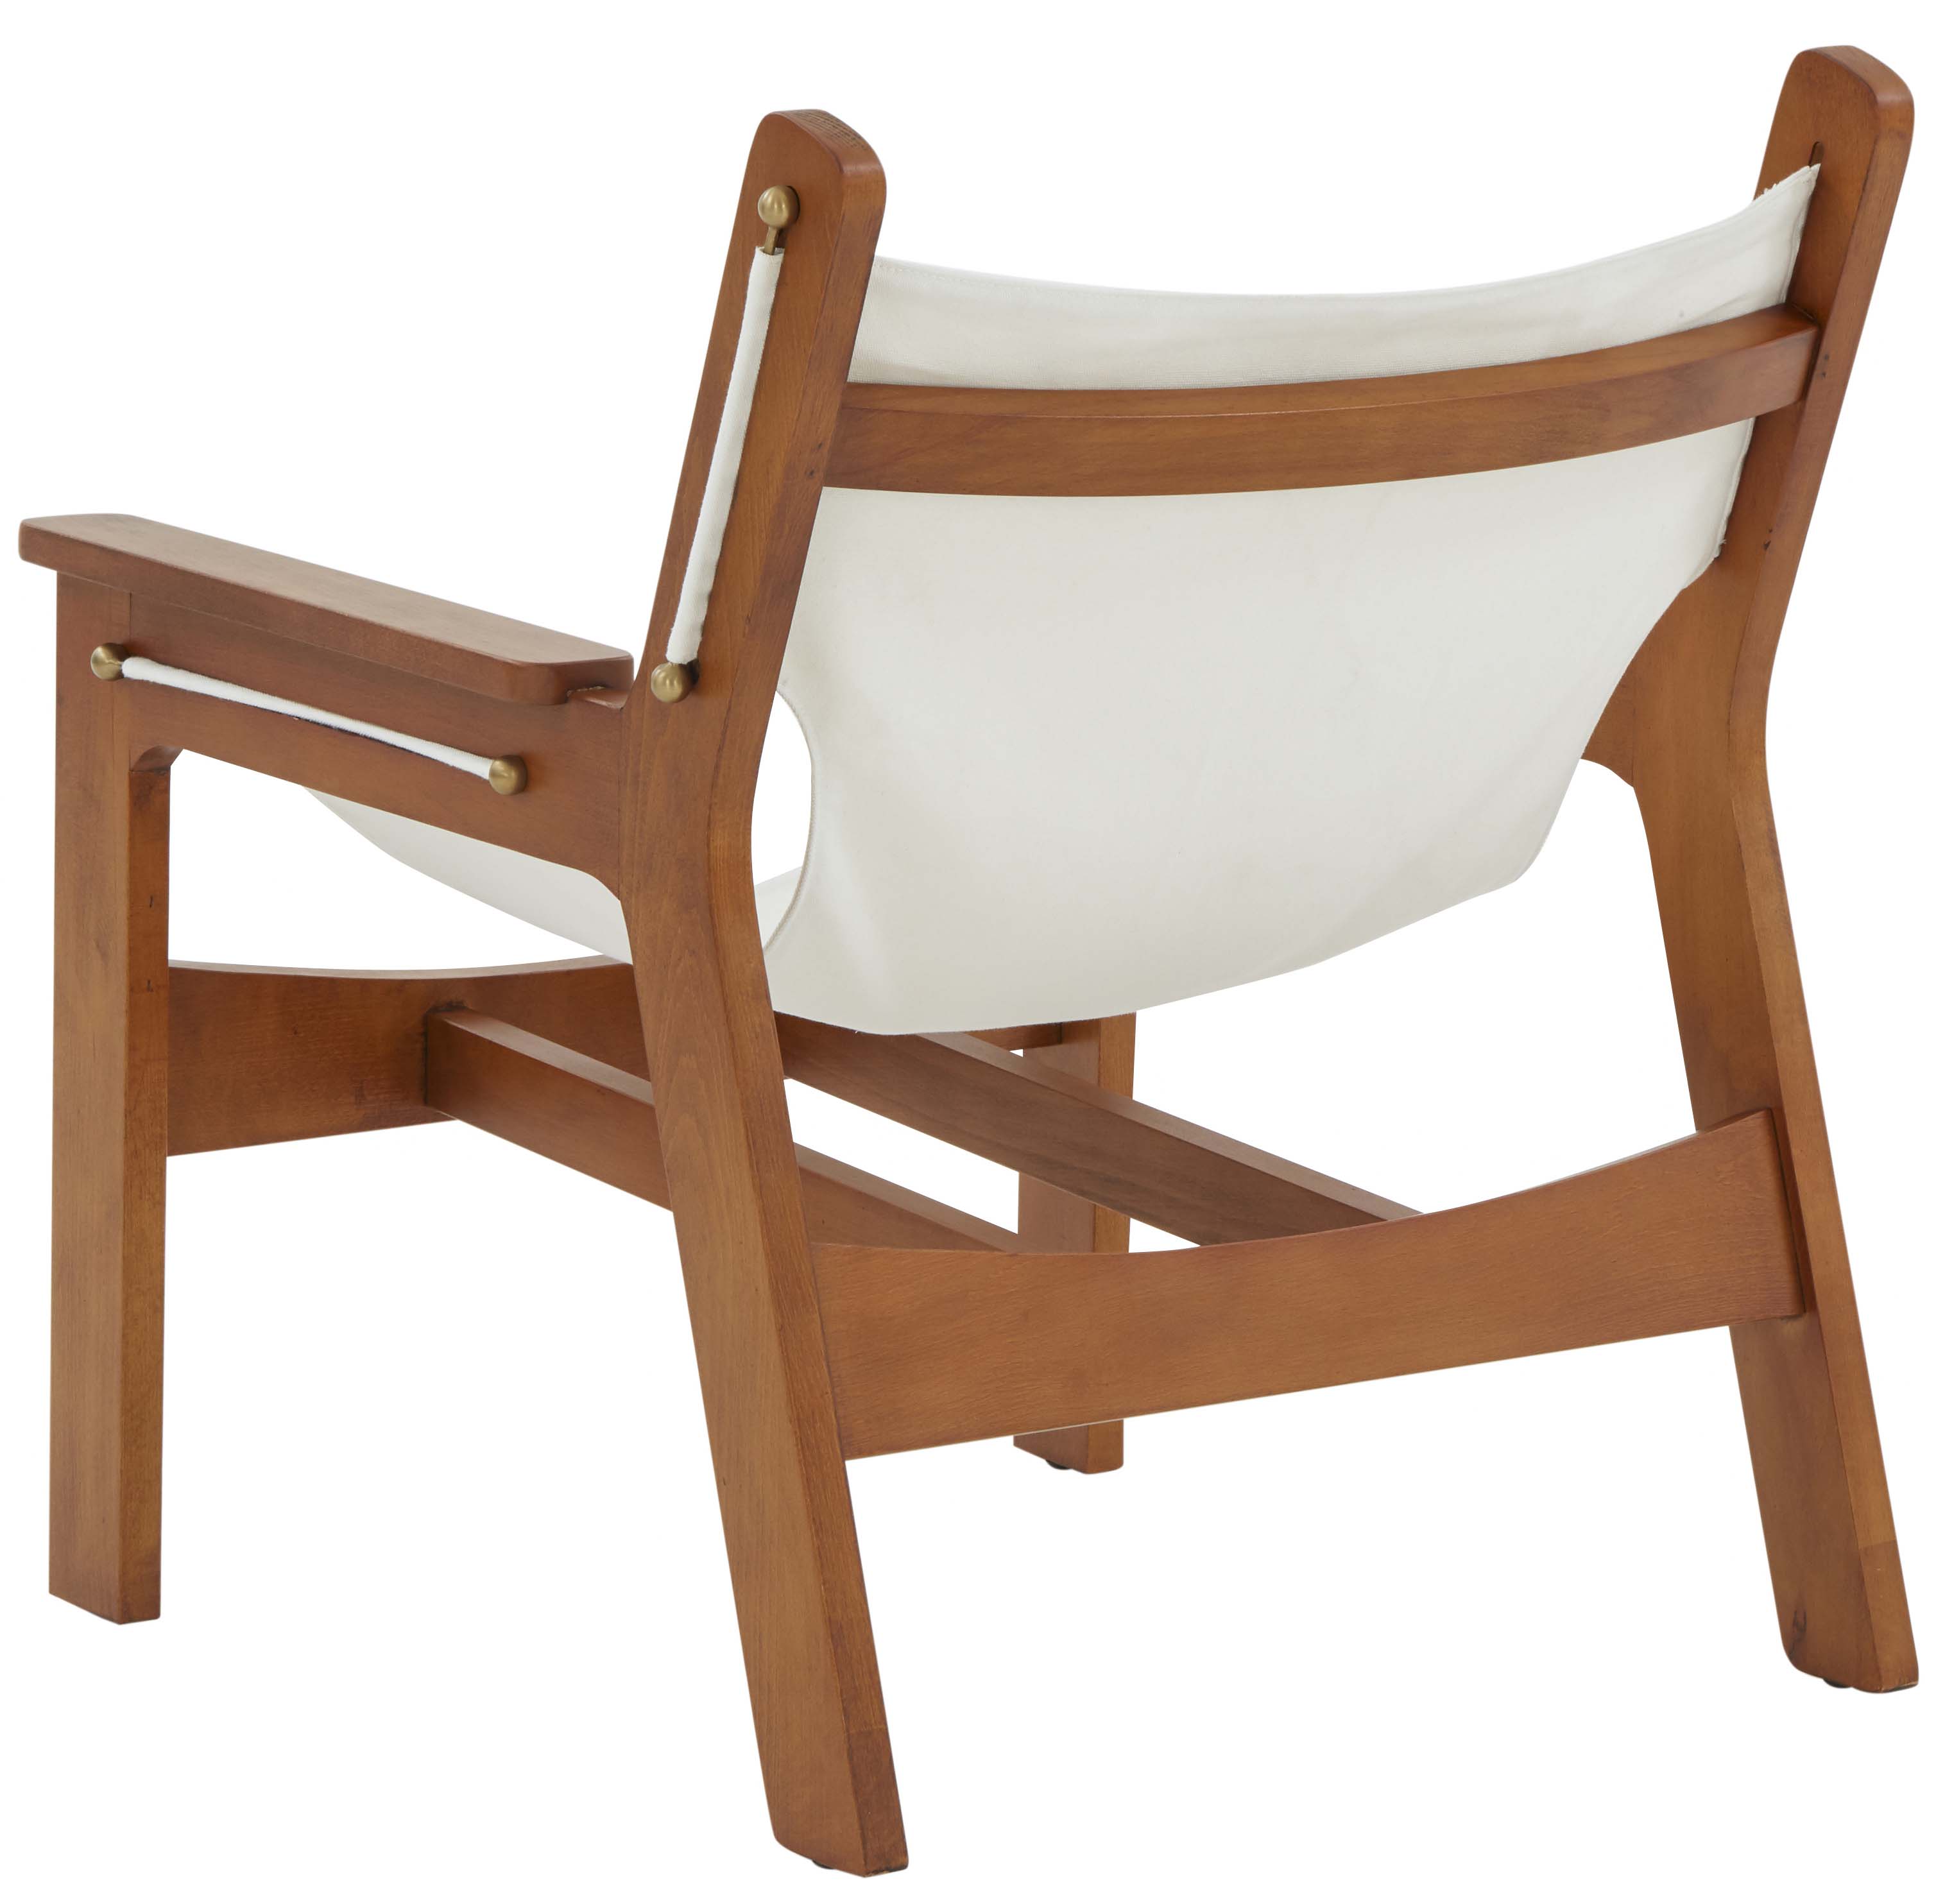 Safavieh Couture Thomson Sling Accent Chair - White / Light Brown